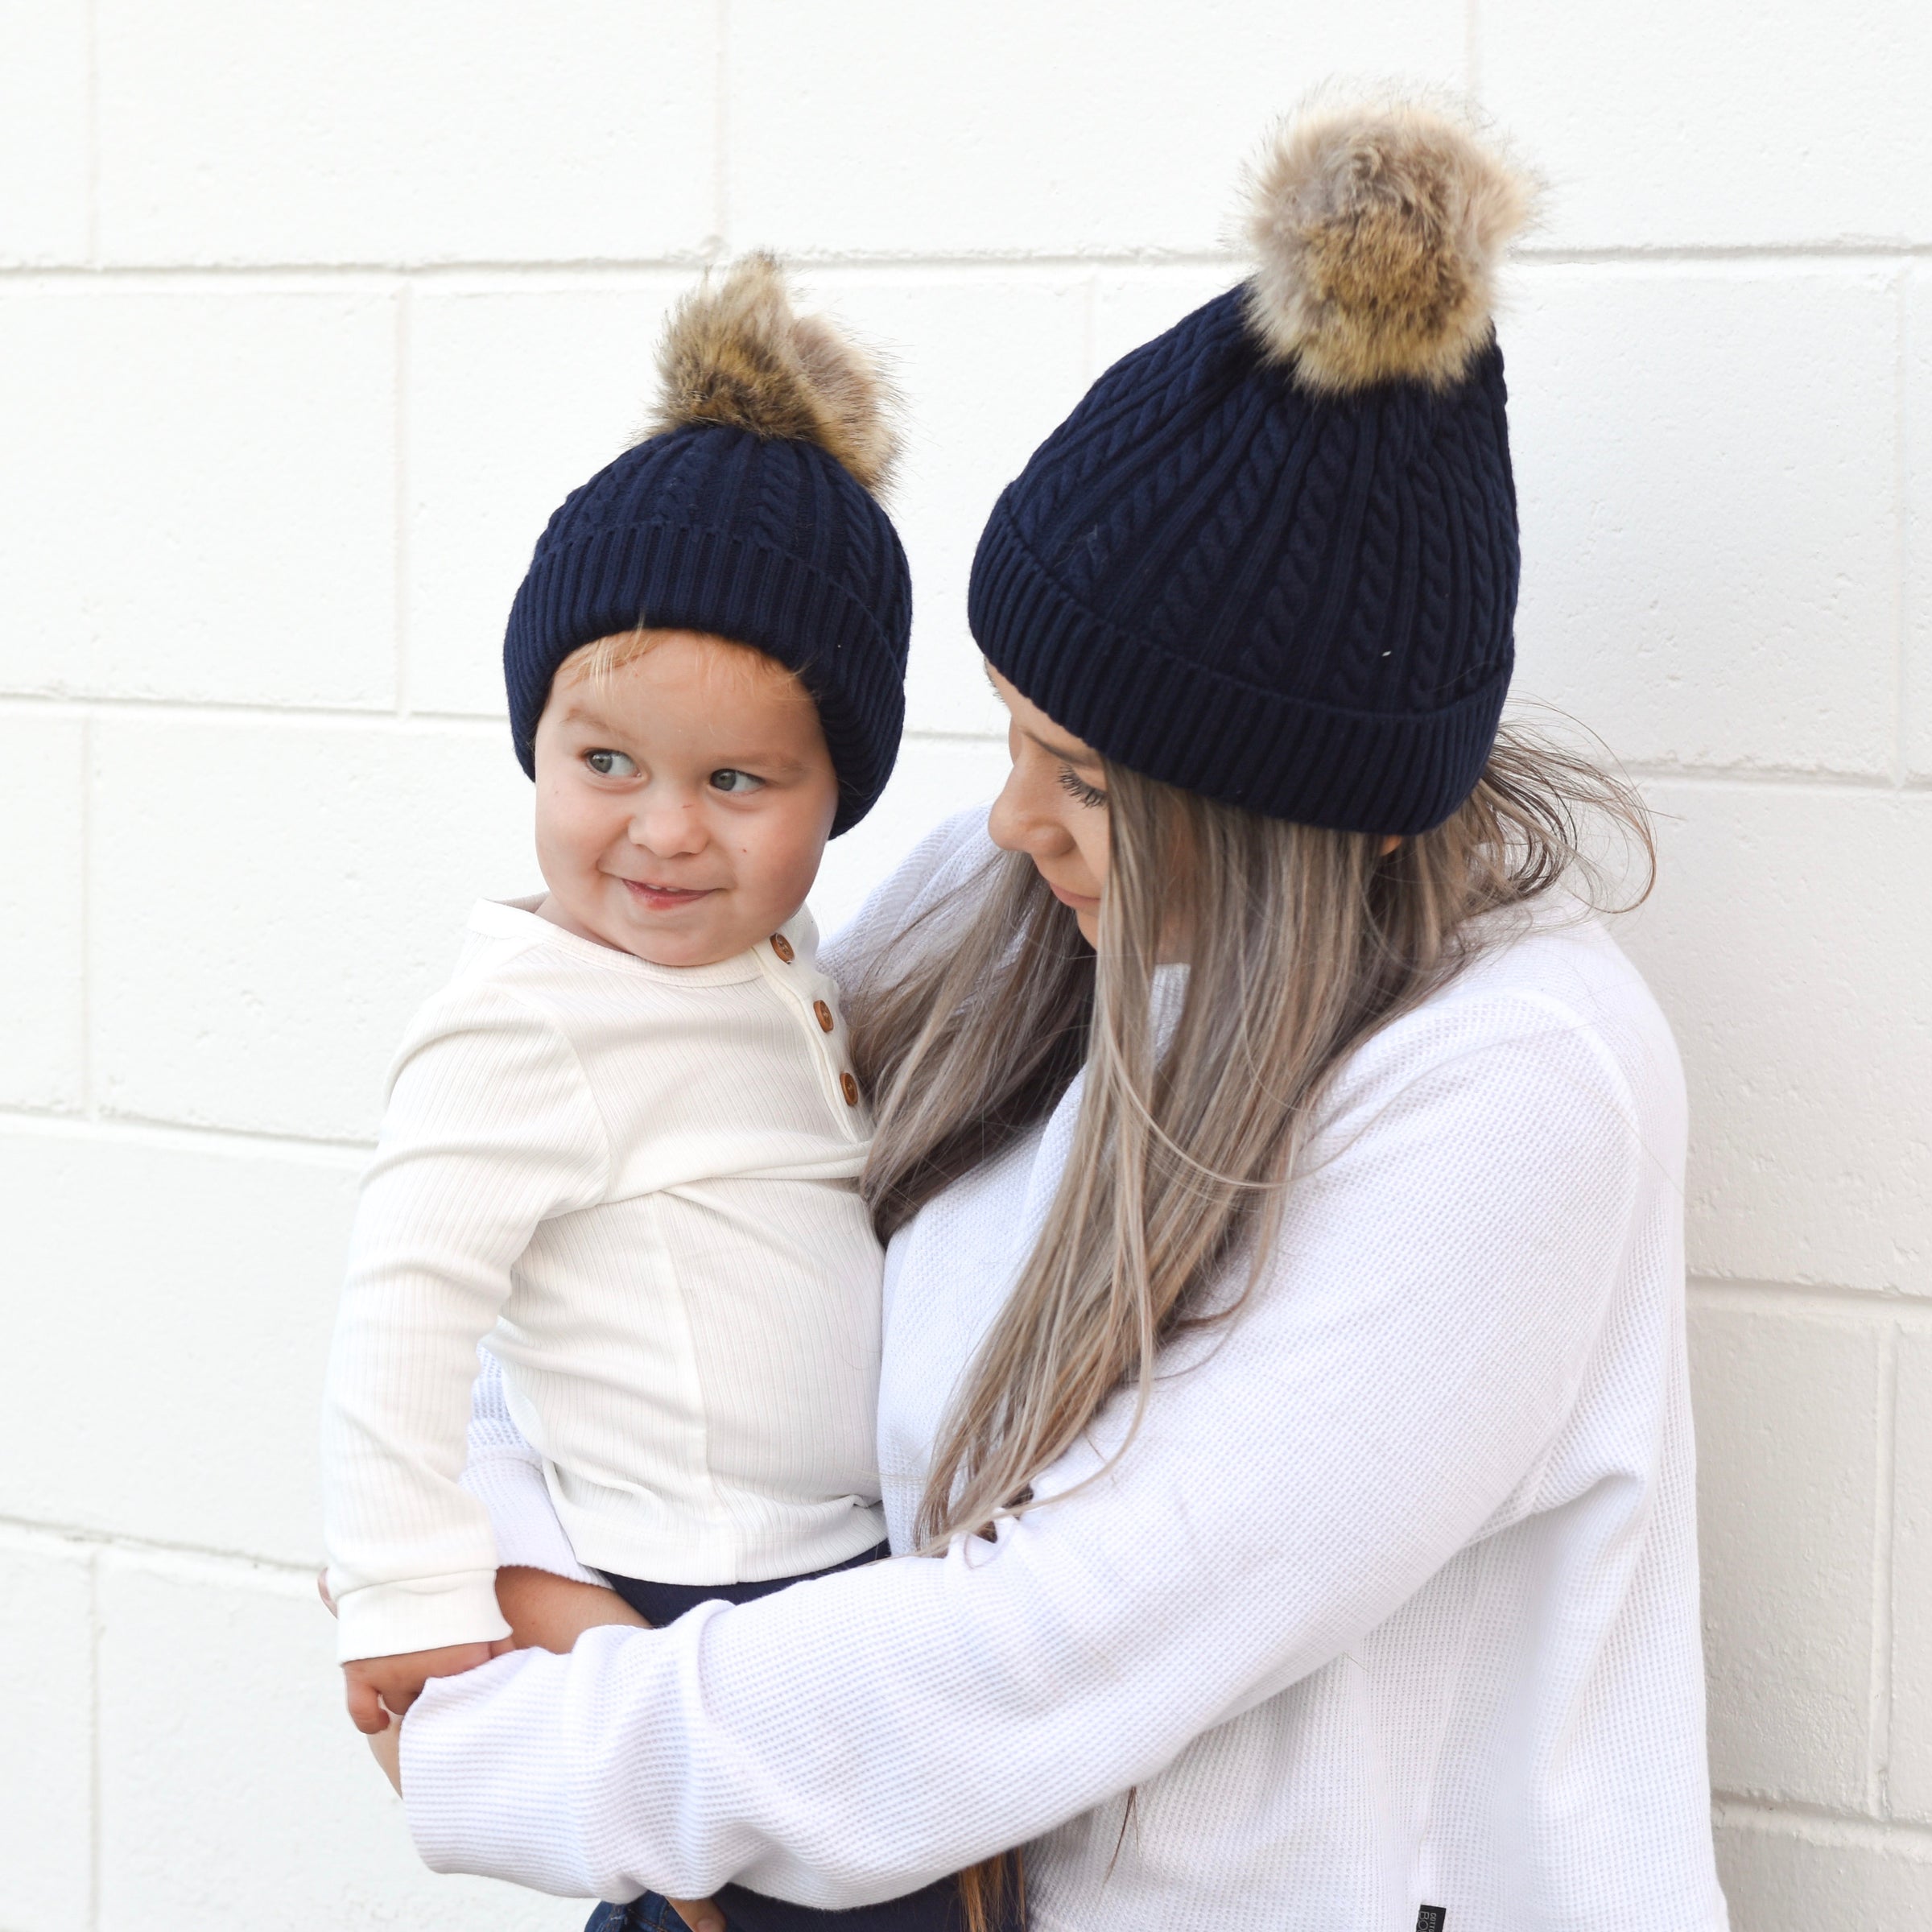 Cable Knit Beanie - Navy